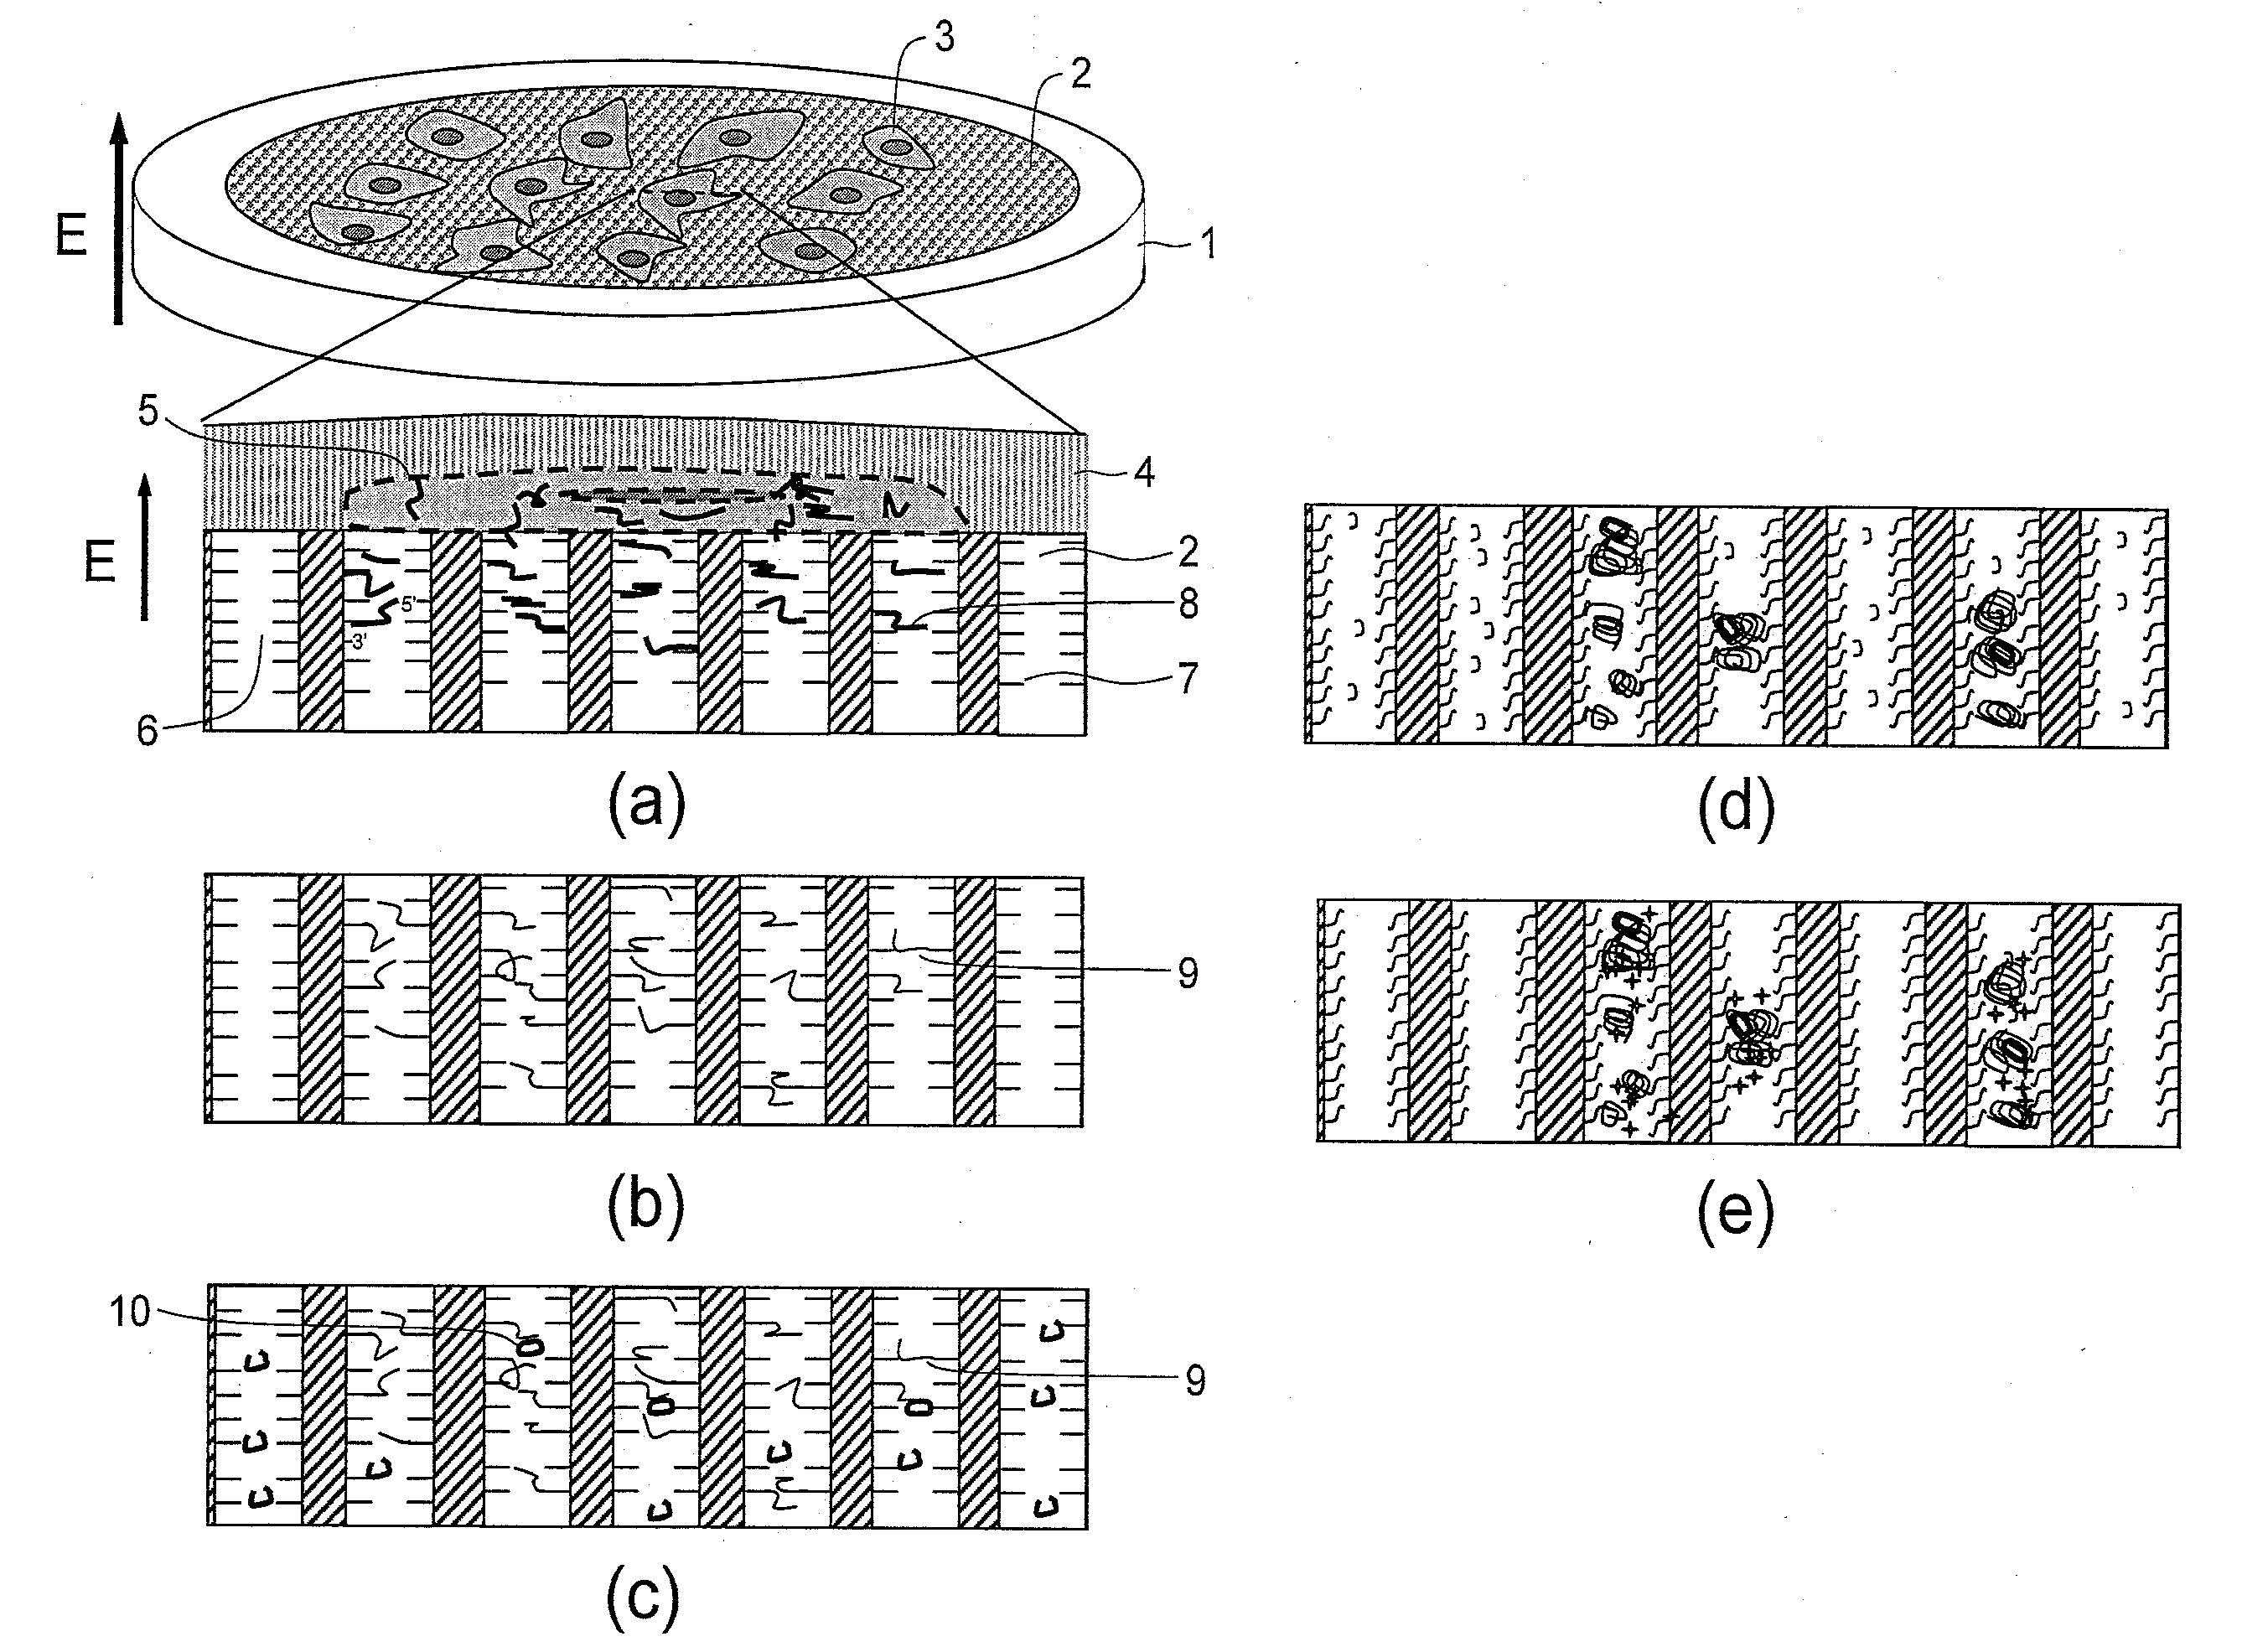 GENE EXPRESSION ANALYSIS METHOD USING TWO DIMENSIONAL cDNA LIBRARY